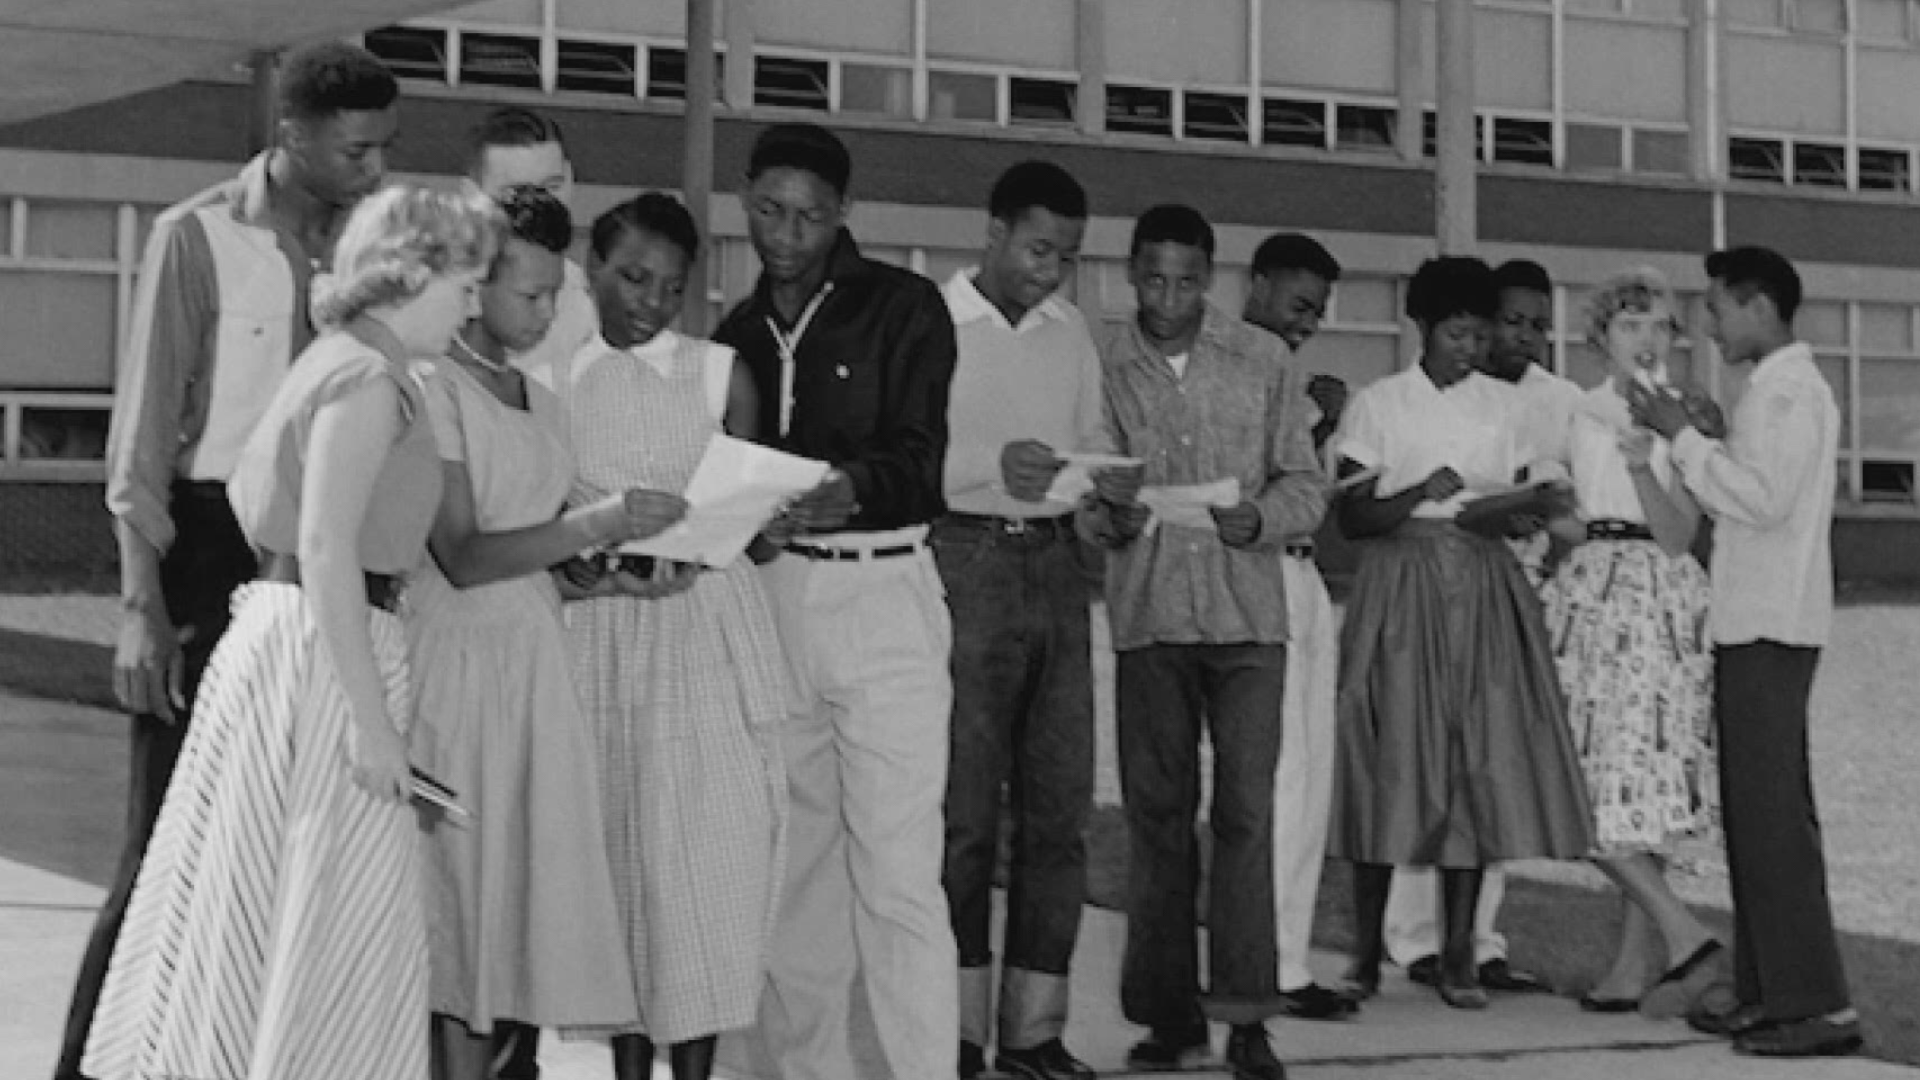 On September 6, 1955—85 students in Oak Ridge were among the first in the country to integrate. But to this day--their stories have remained largely untold.